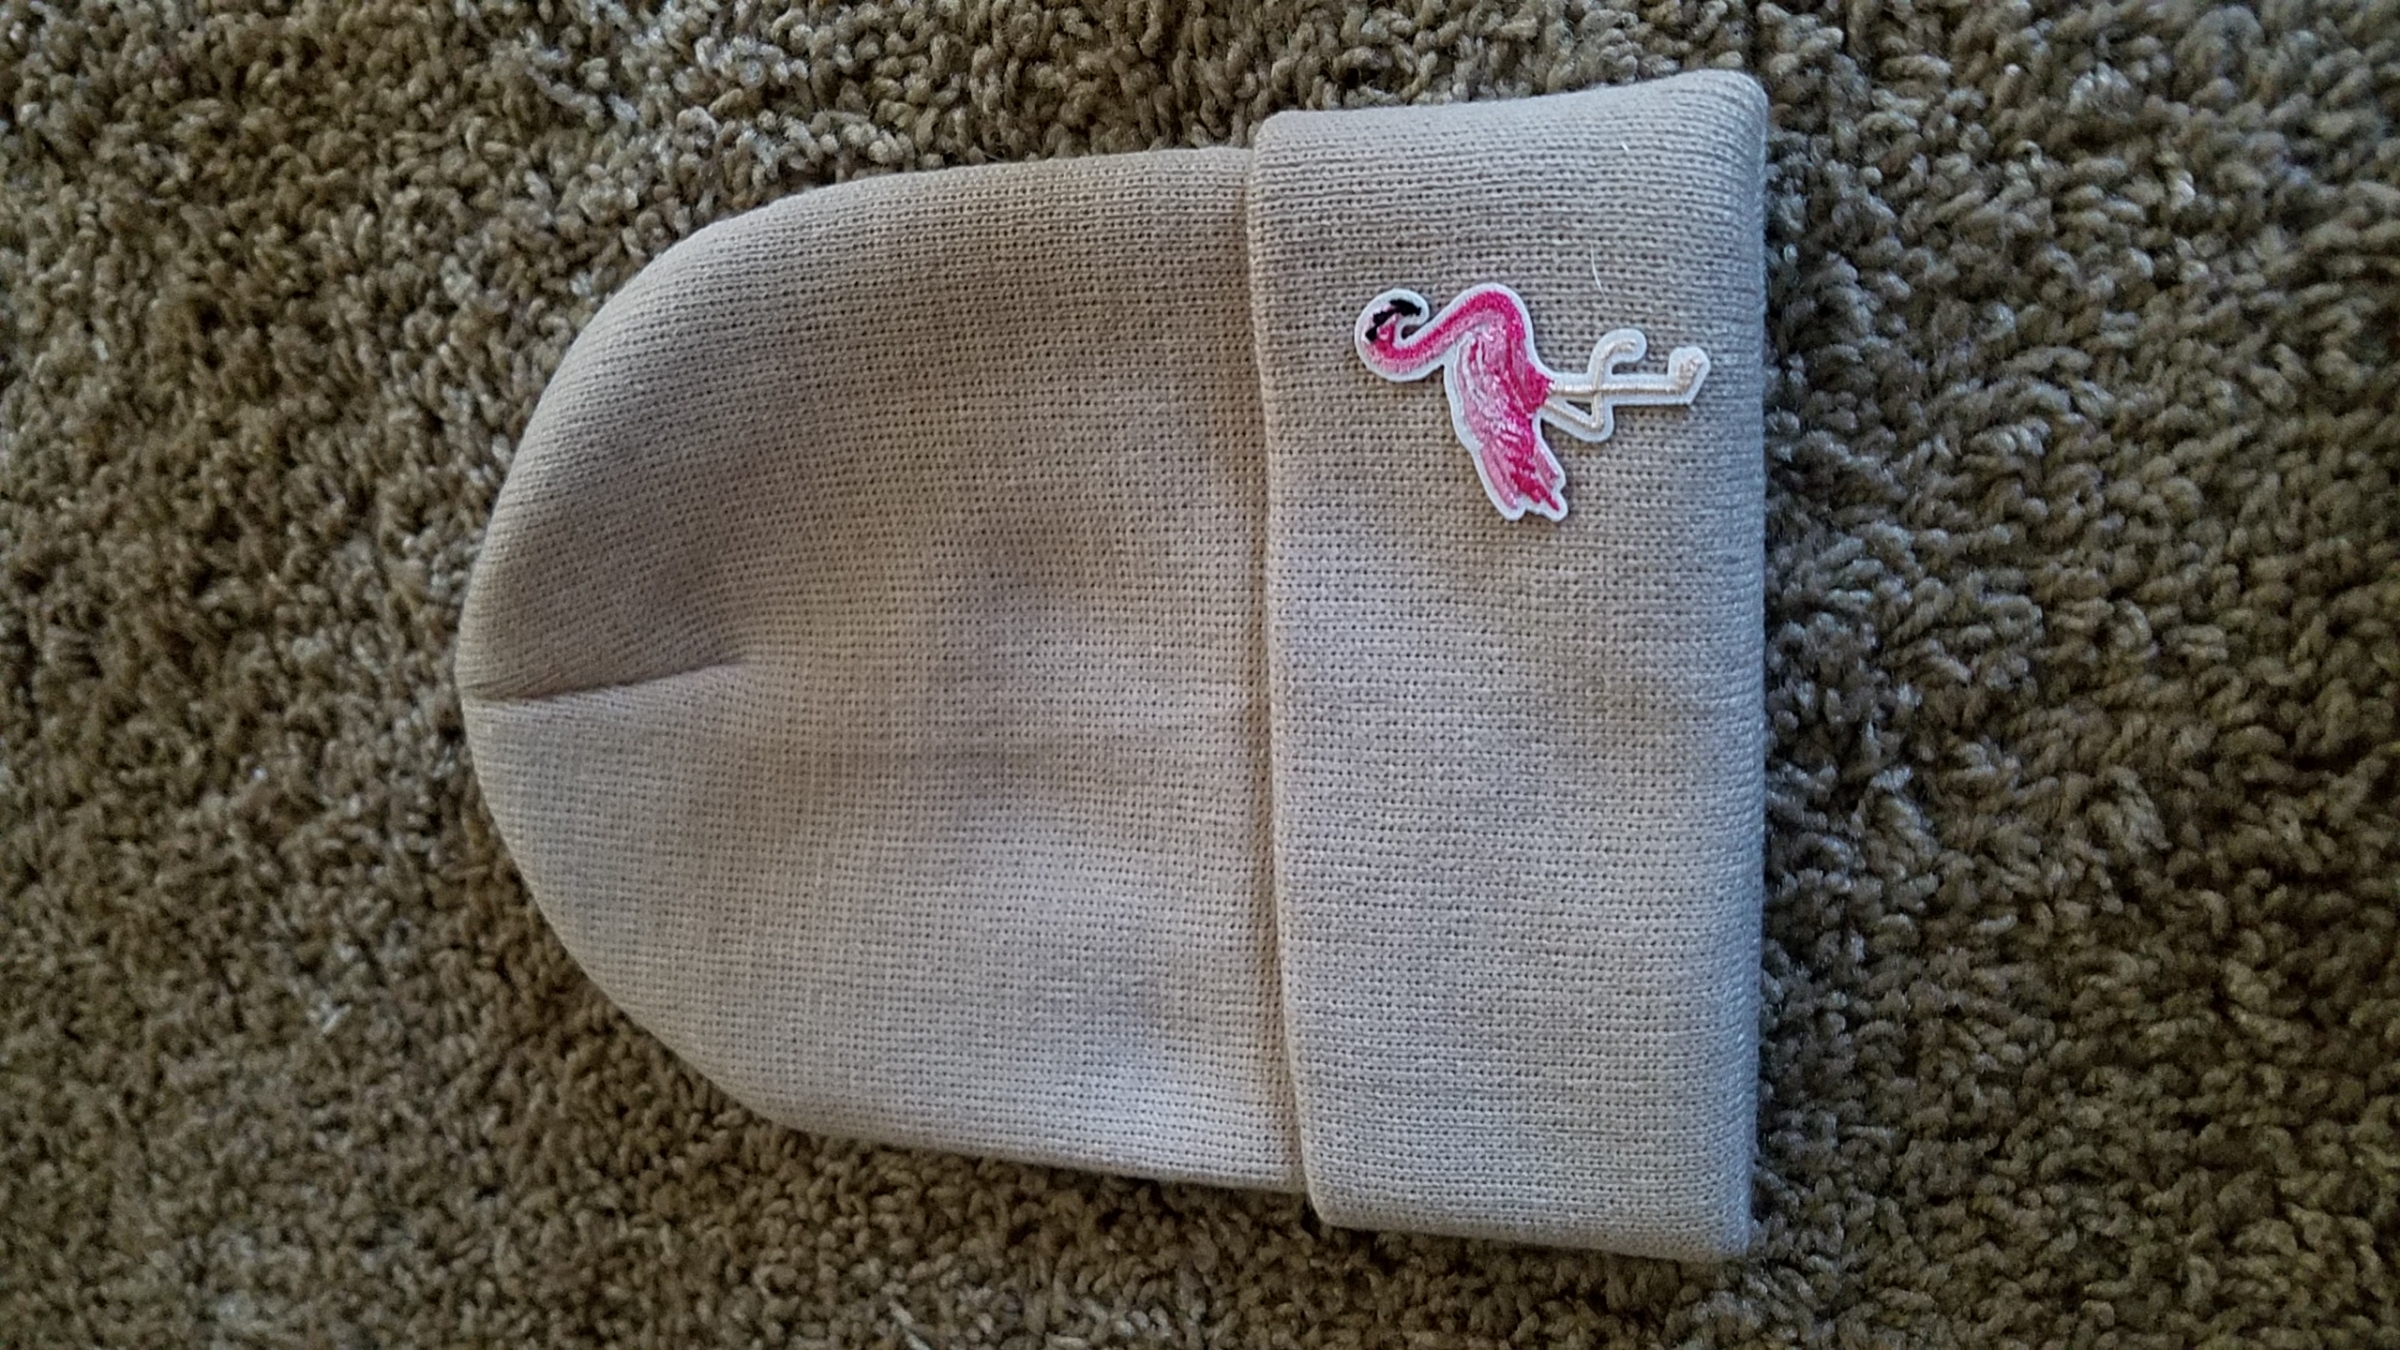 Bought this beanie for my wife, but my daughter confiscated it!